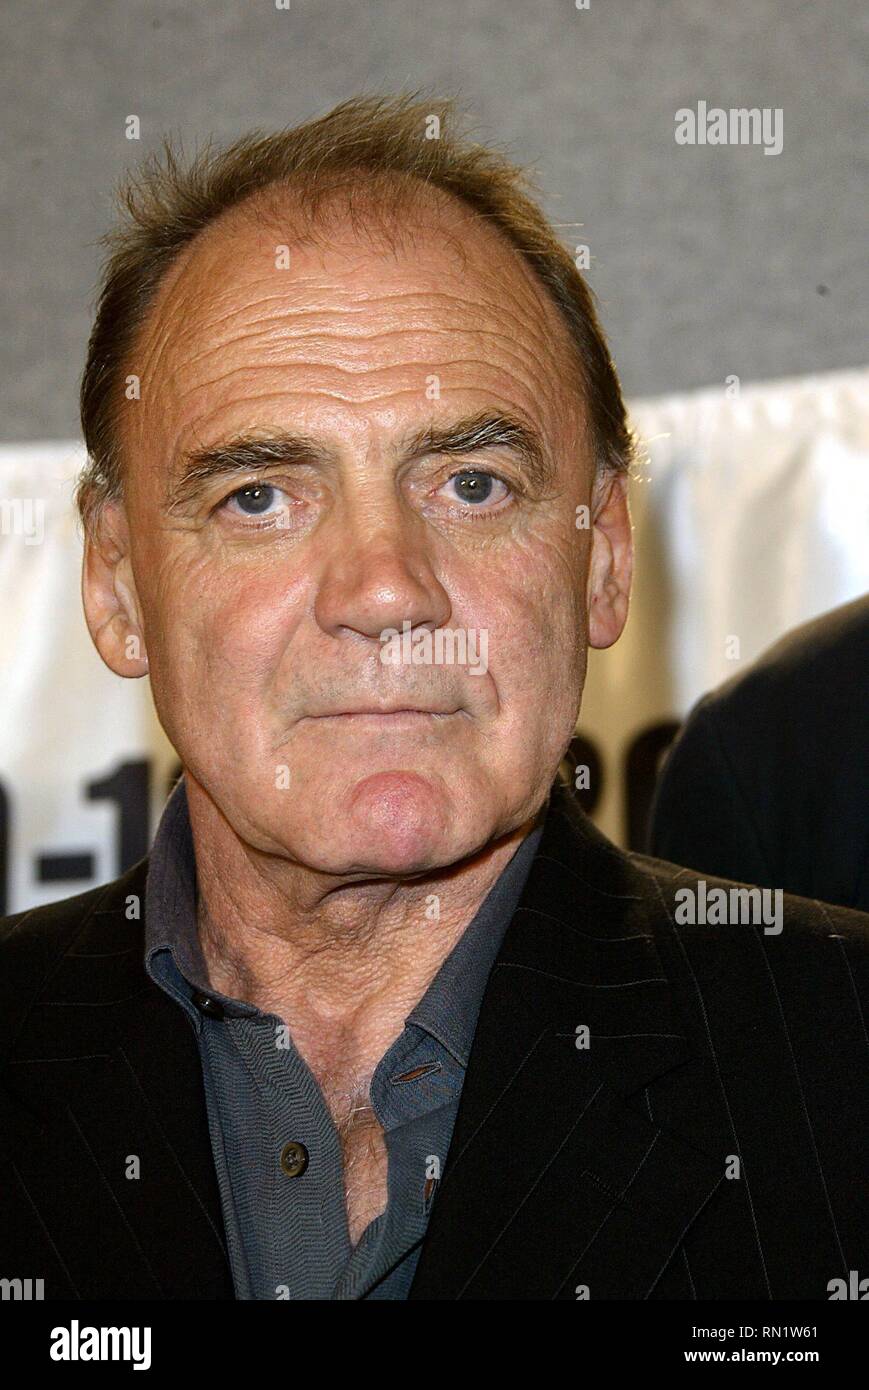 Toronto, Canada. 14th Sep, 2004. (dpa) - Actor Bruno Ganz presents his new movie 'The Downfall - Hitler and the End of the Third Reich' at the Film Festival in Toronto, Canada, 14 September 2004. | usage worldwide Credit: dpa/Alamy Live News Stock Photo